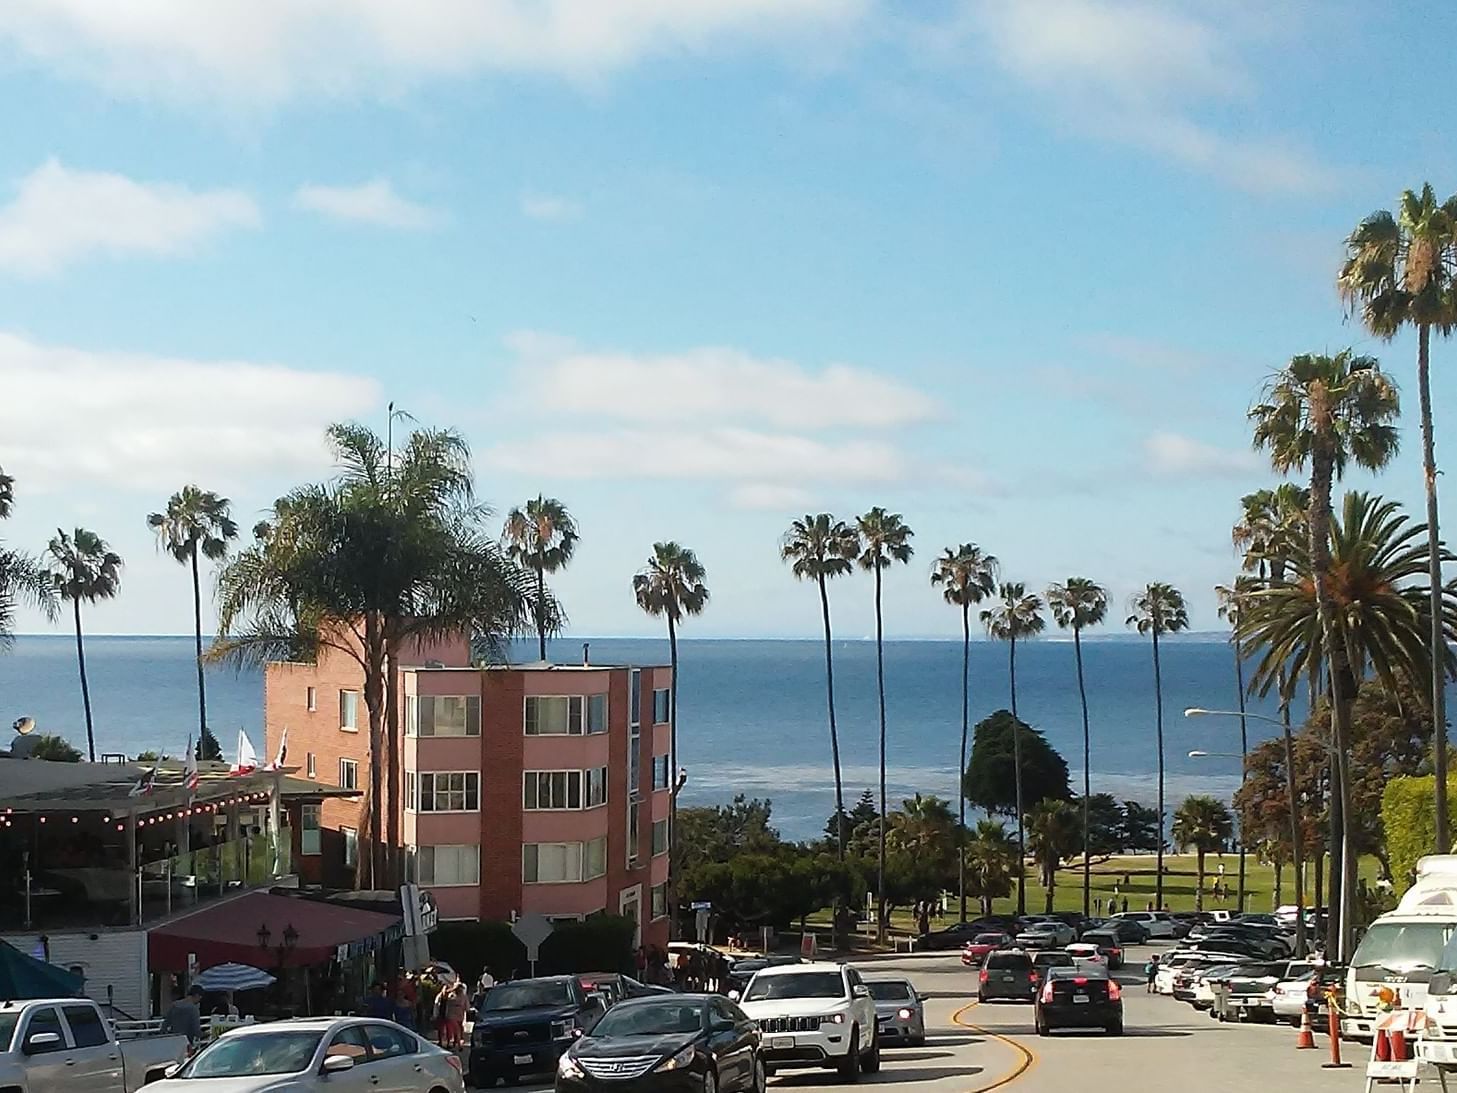 Distant view of the street & hotel, Inn by the Sea at La Jolla